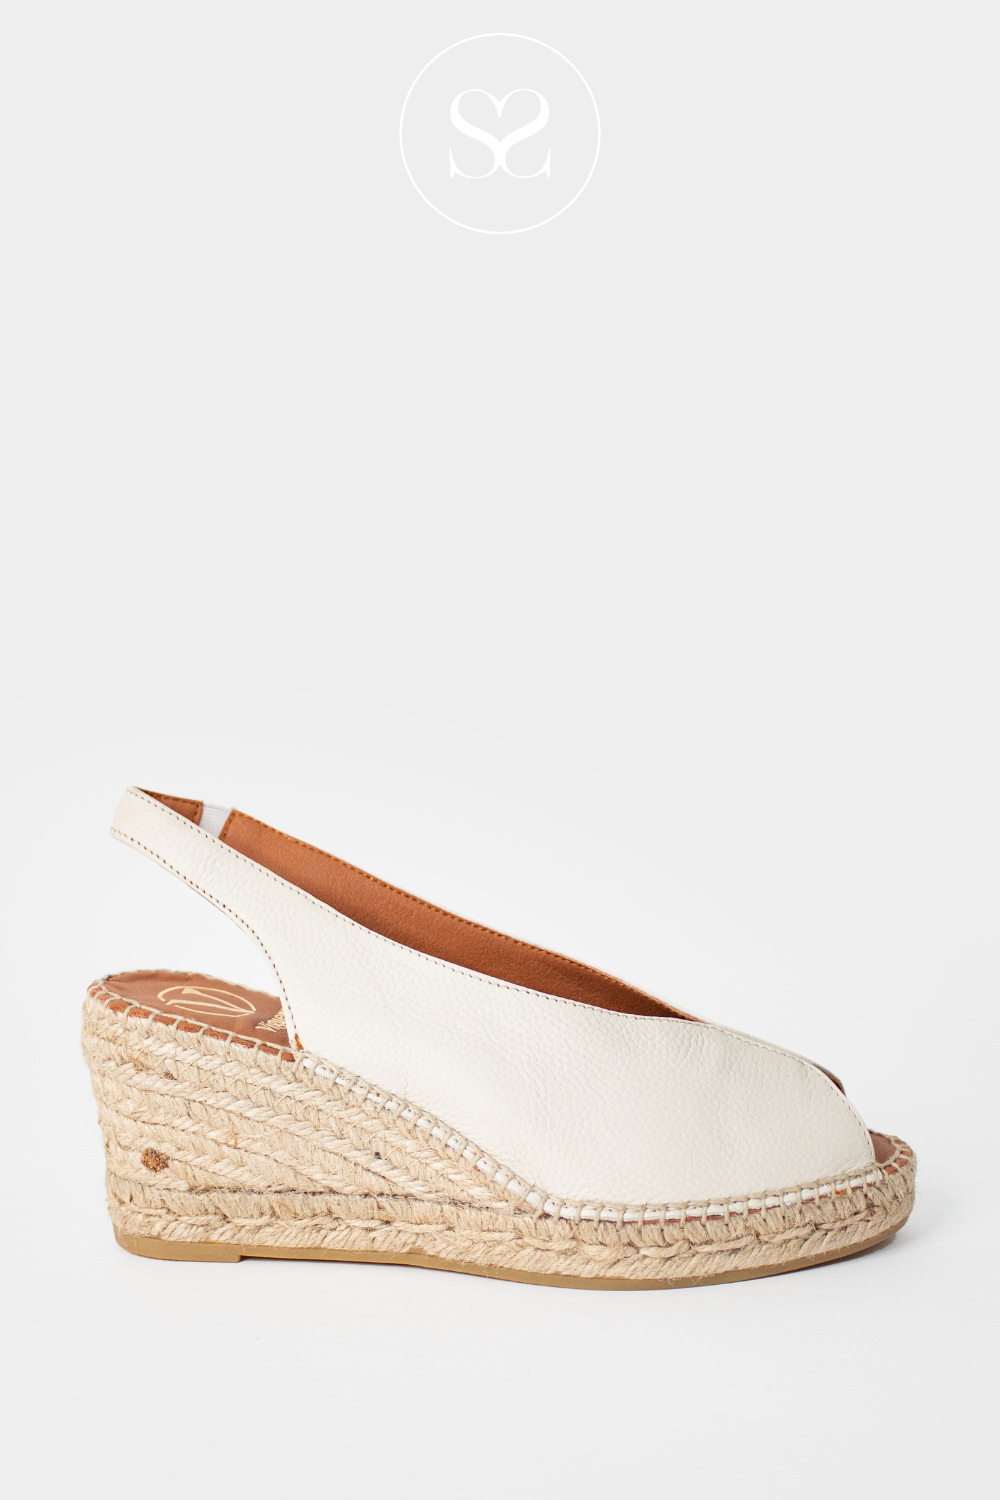 VIGUERA 2127 CREAM WEDGE ESPADRILLE SANDALS WITH PEEPTOE FRONT AND SLINGBACK HEEL